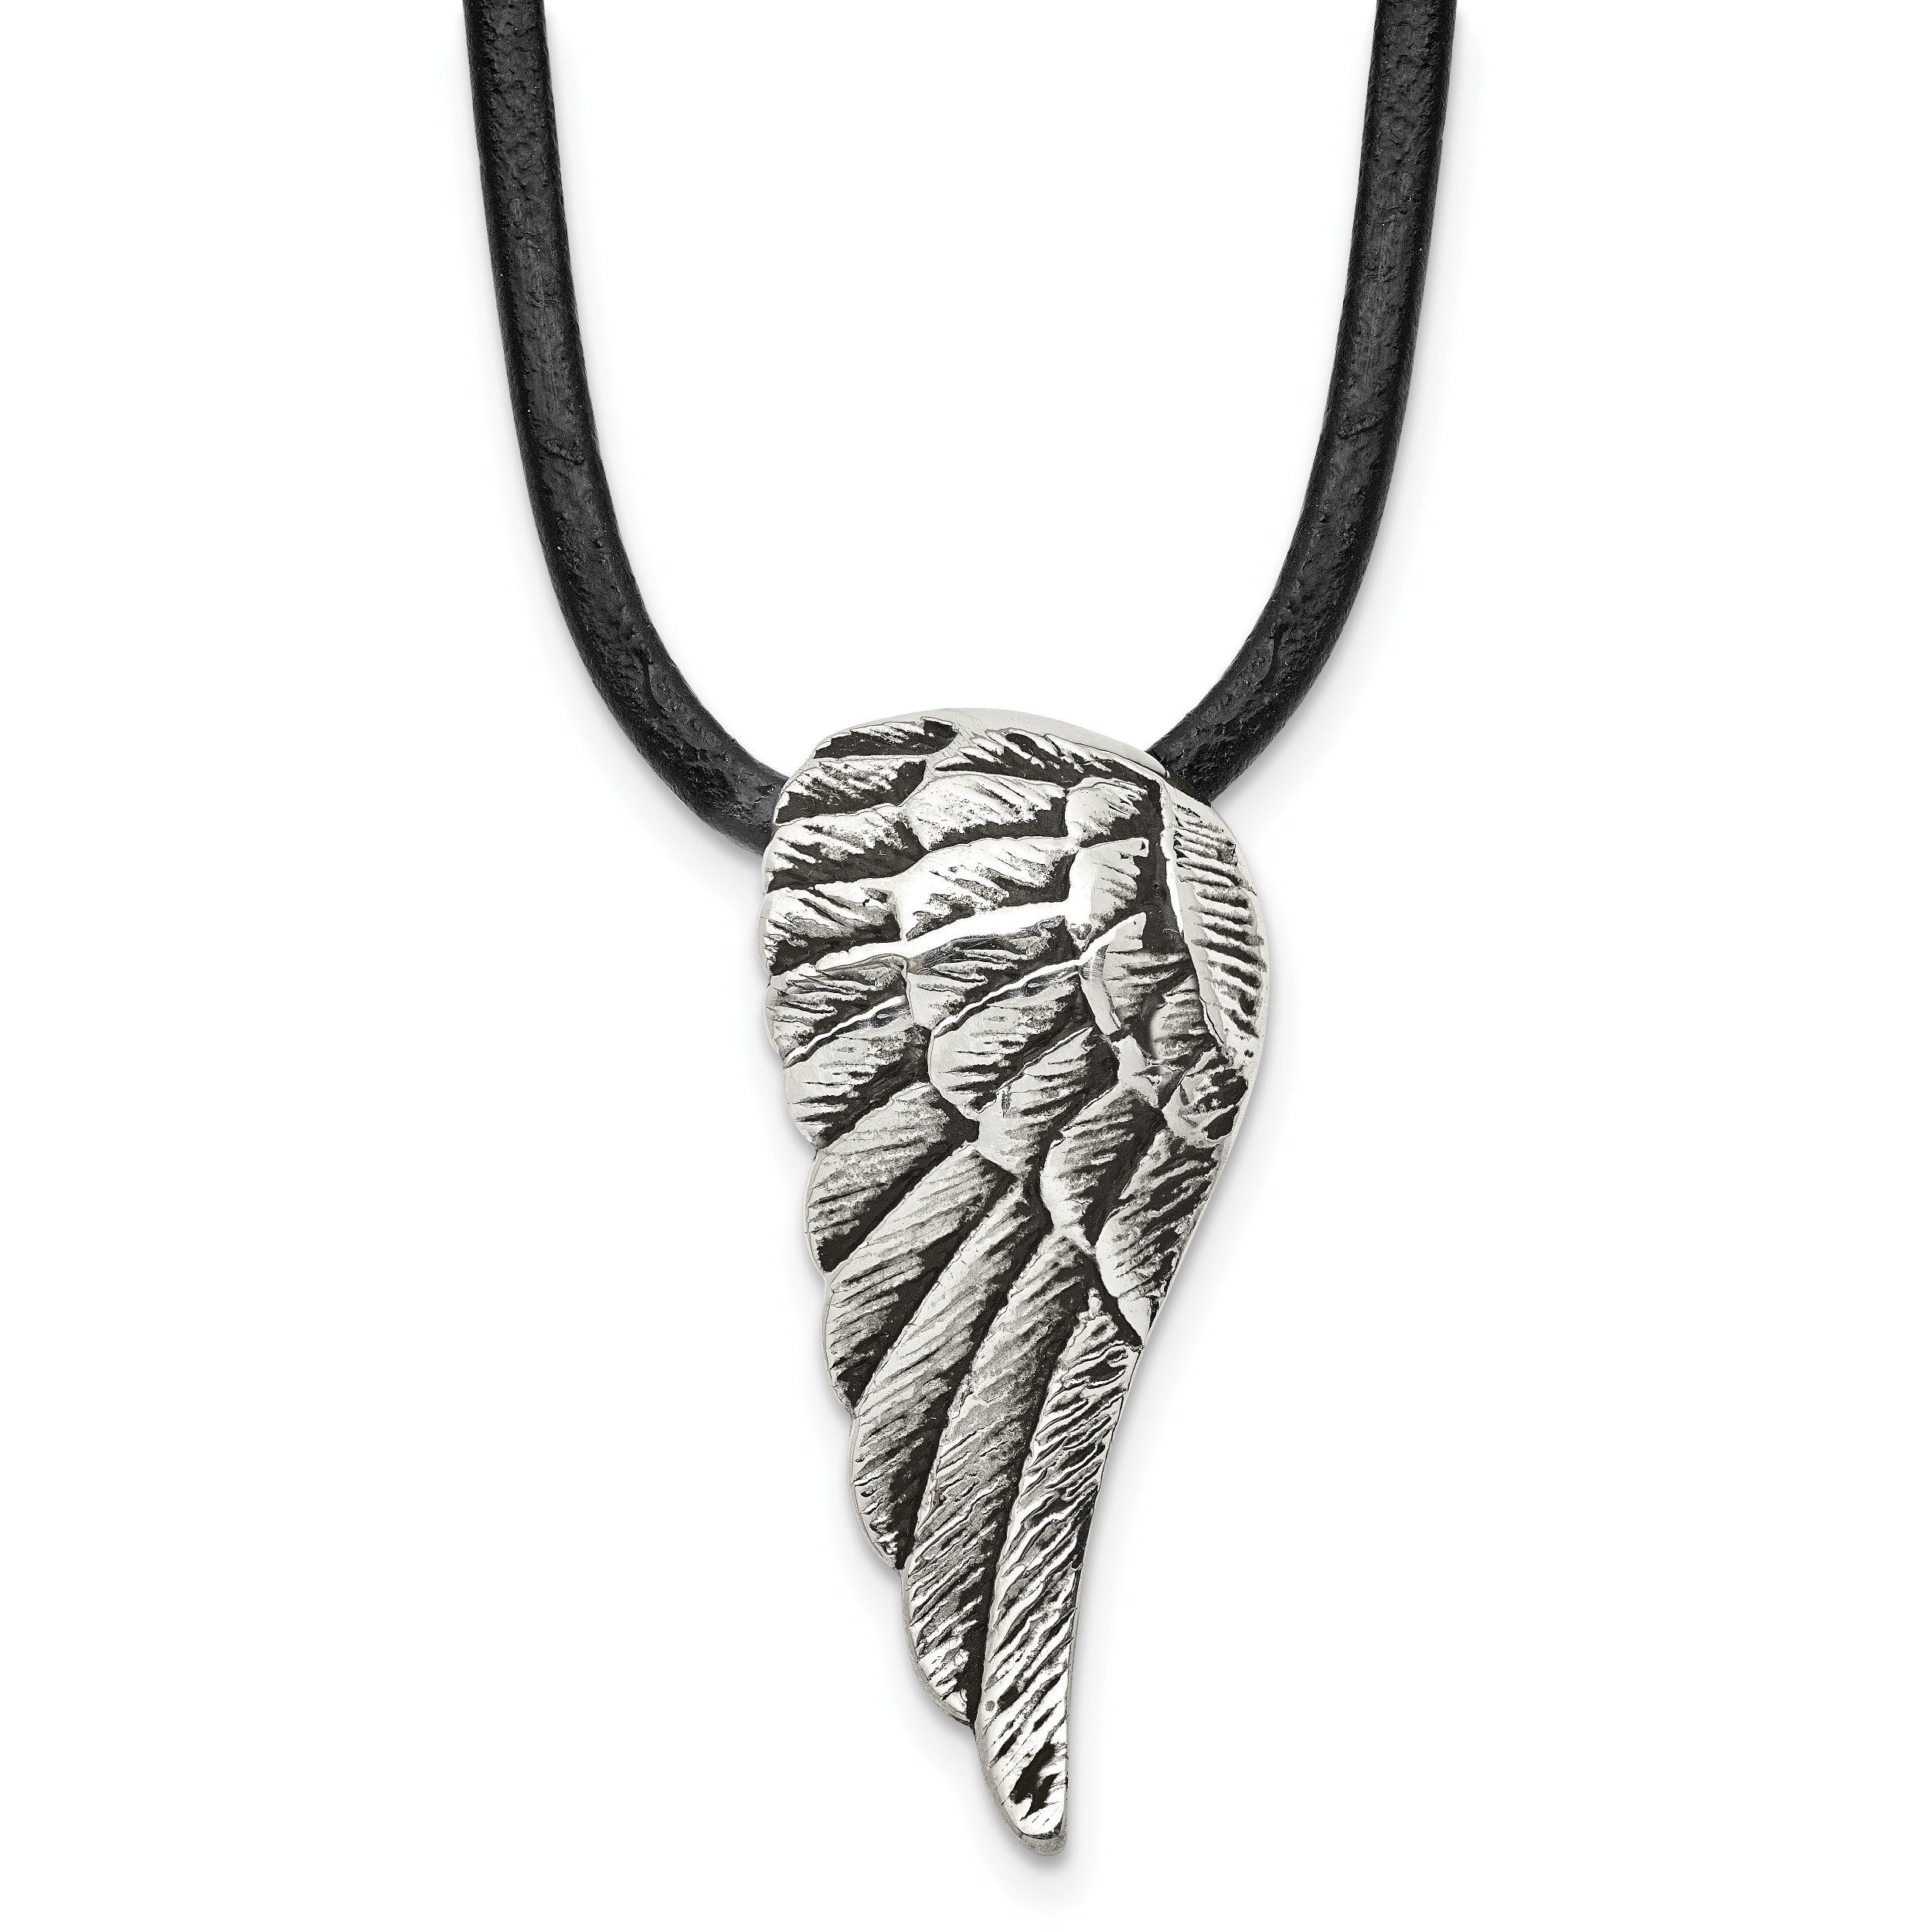 Chisel Stainless Steel Antiqued and Polished Wing Pendant on a 20 inch Leather Cord Necklace